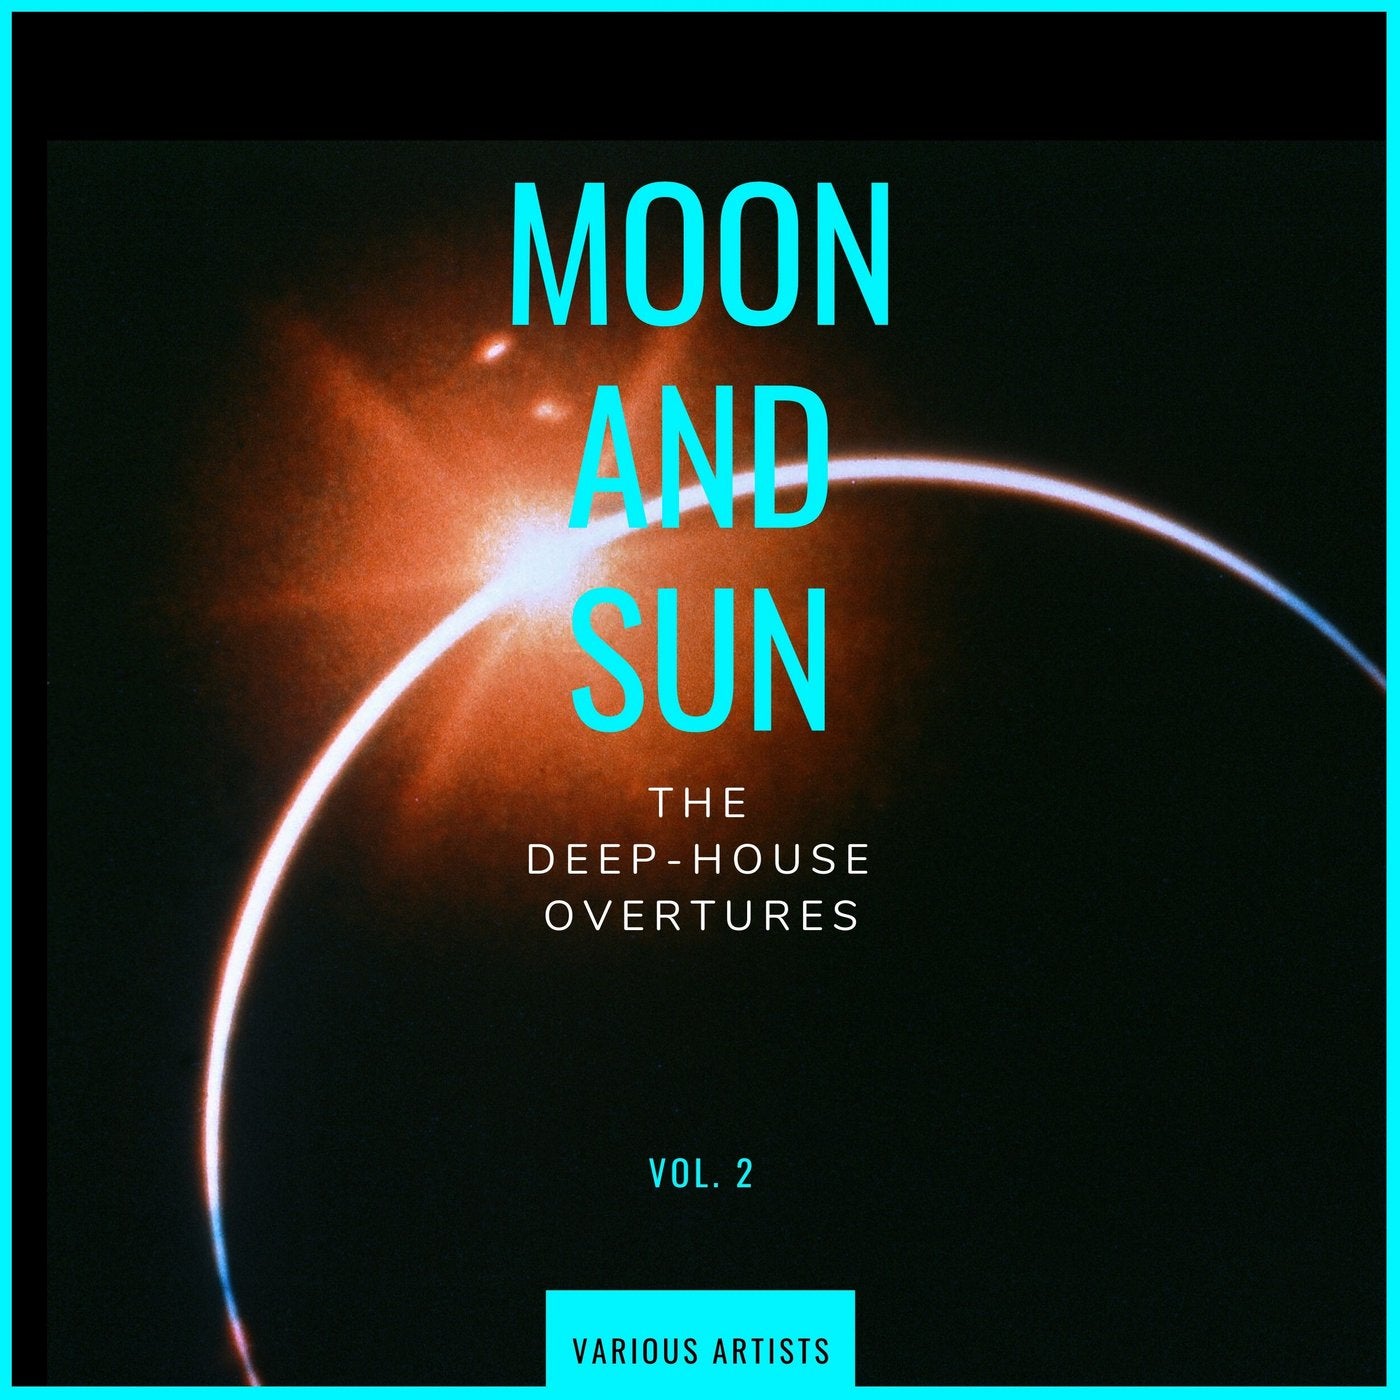 Moon and Sun (The Deep-House Overtures), Vol. 2